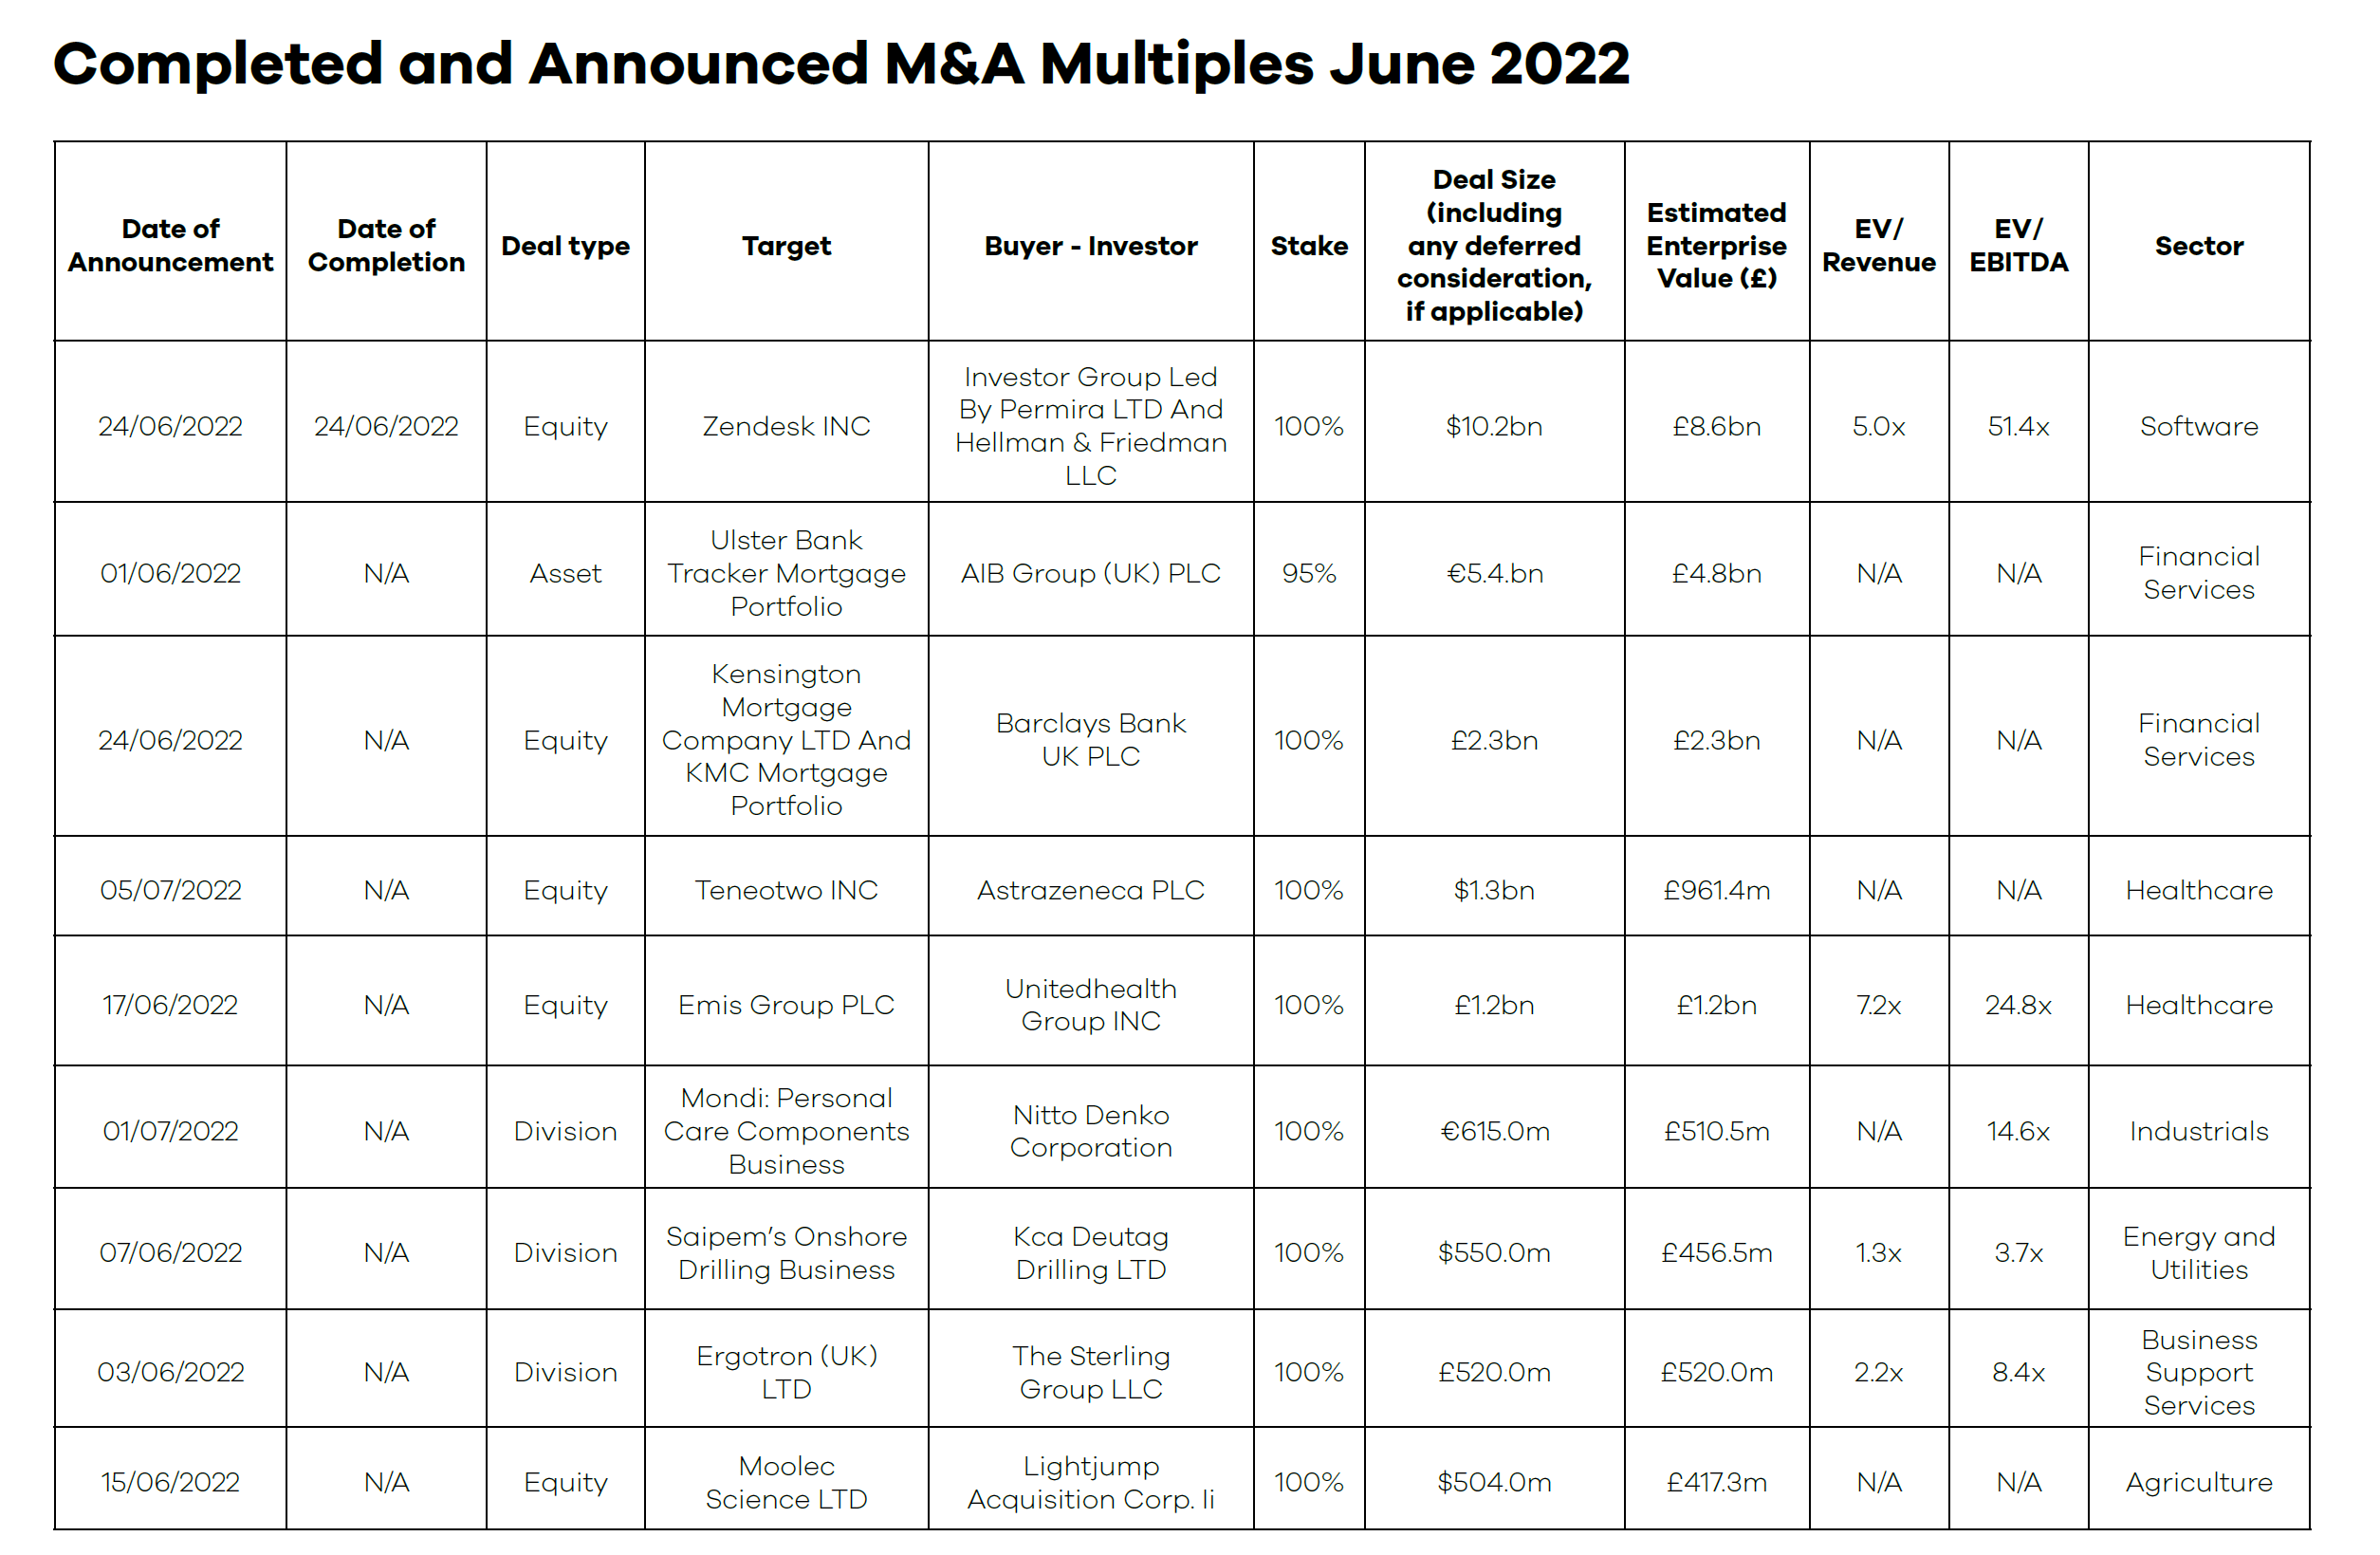 Sample Deals from June 2022